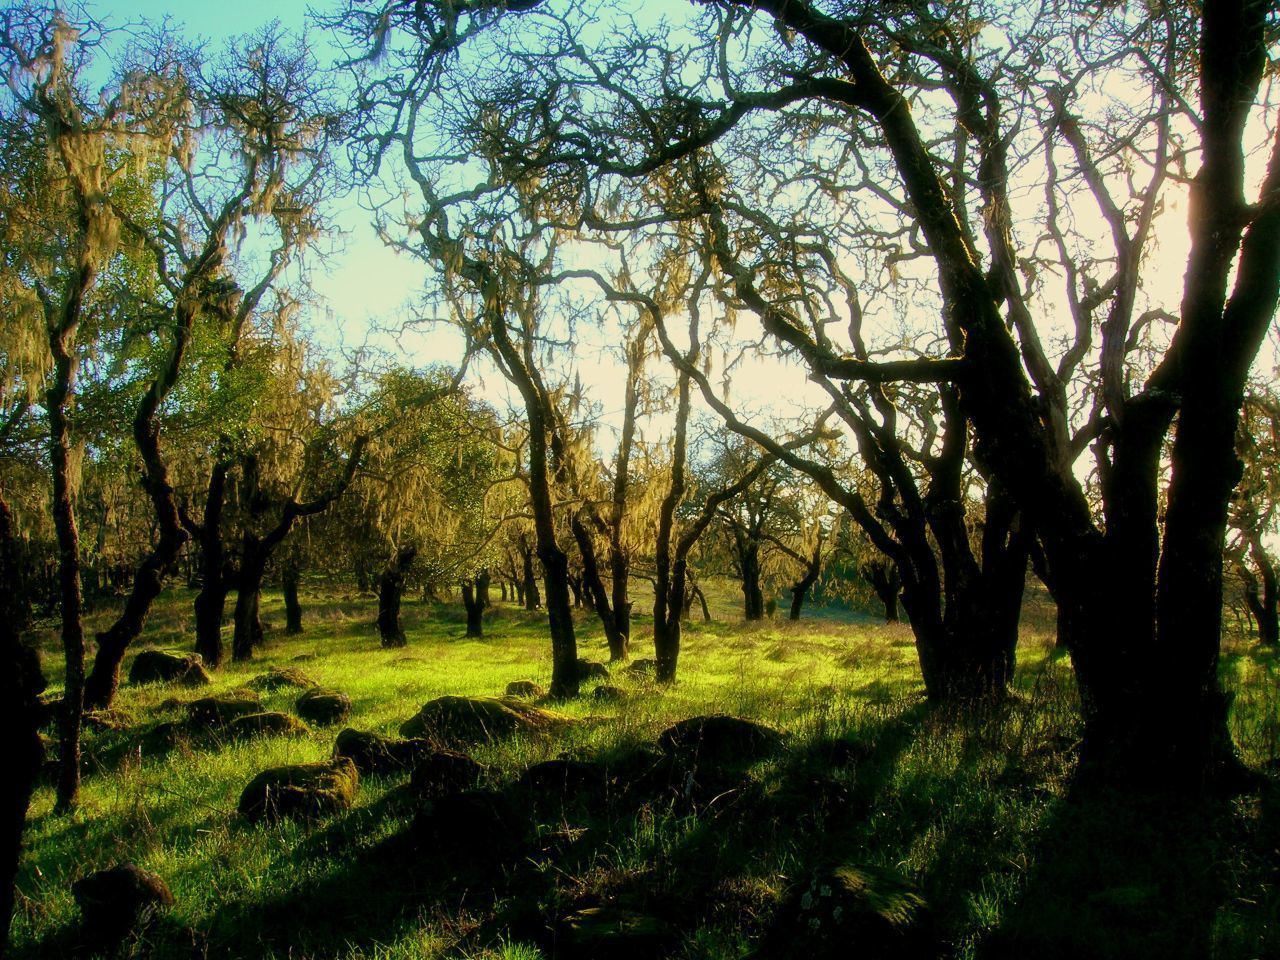 oak trees covered in lichen - annadel state park